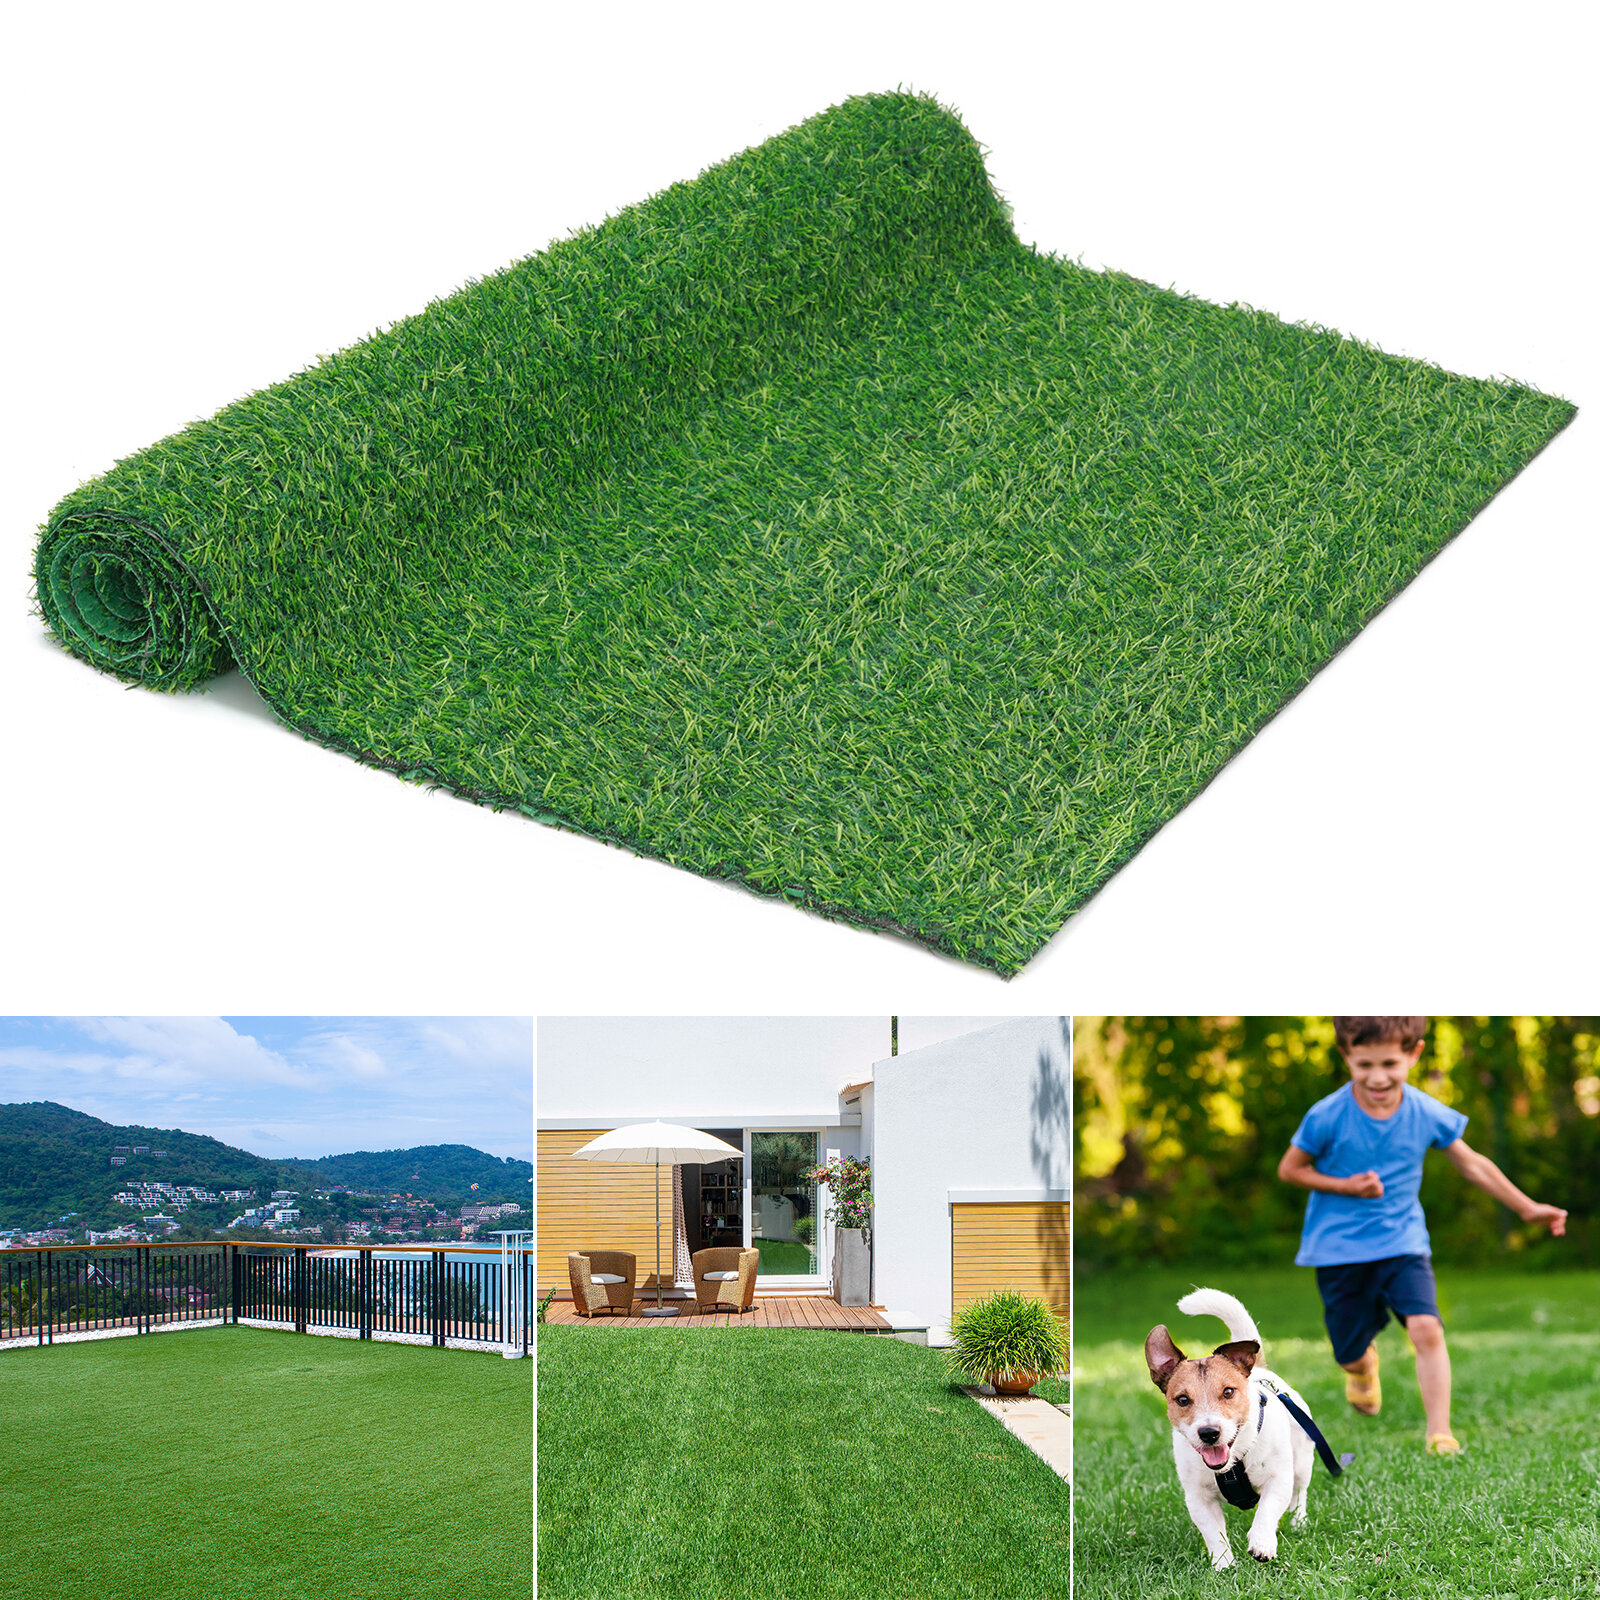 

Premium Quality UV Resistant Artificial Grass Mat 15mm Thick Fire Retardant PP+PE Material Easy Clean Cut to Fit Indoor